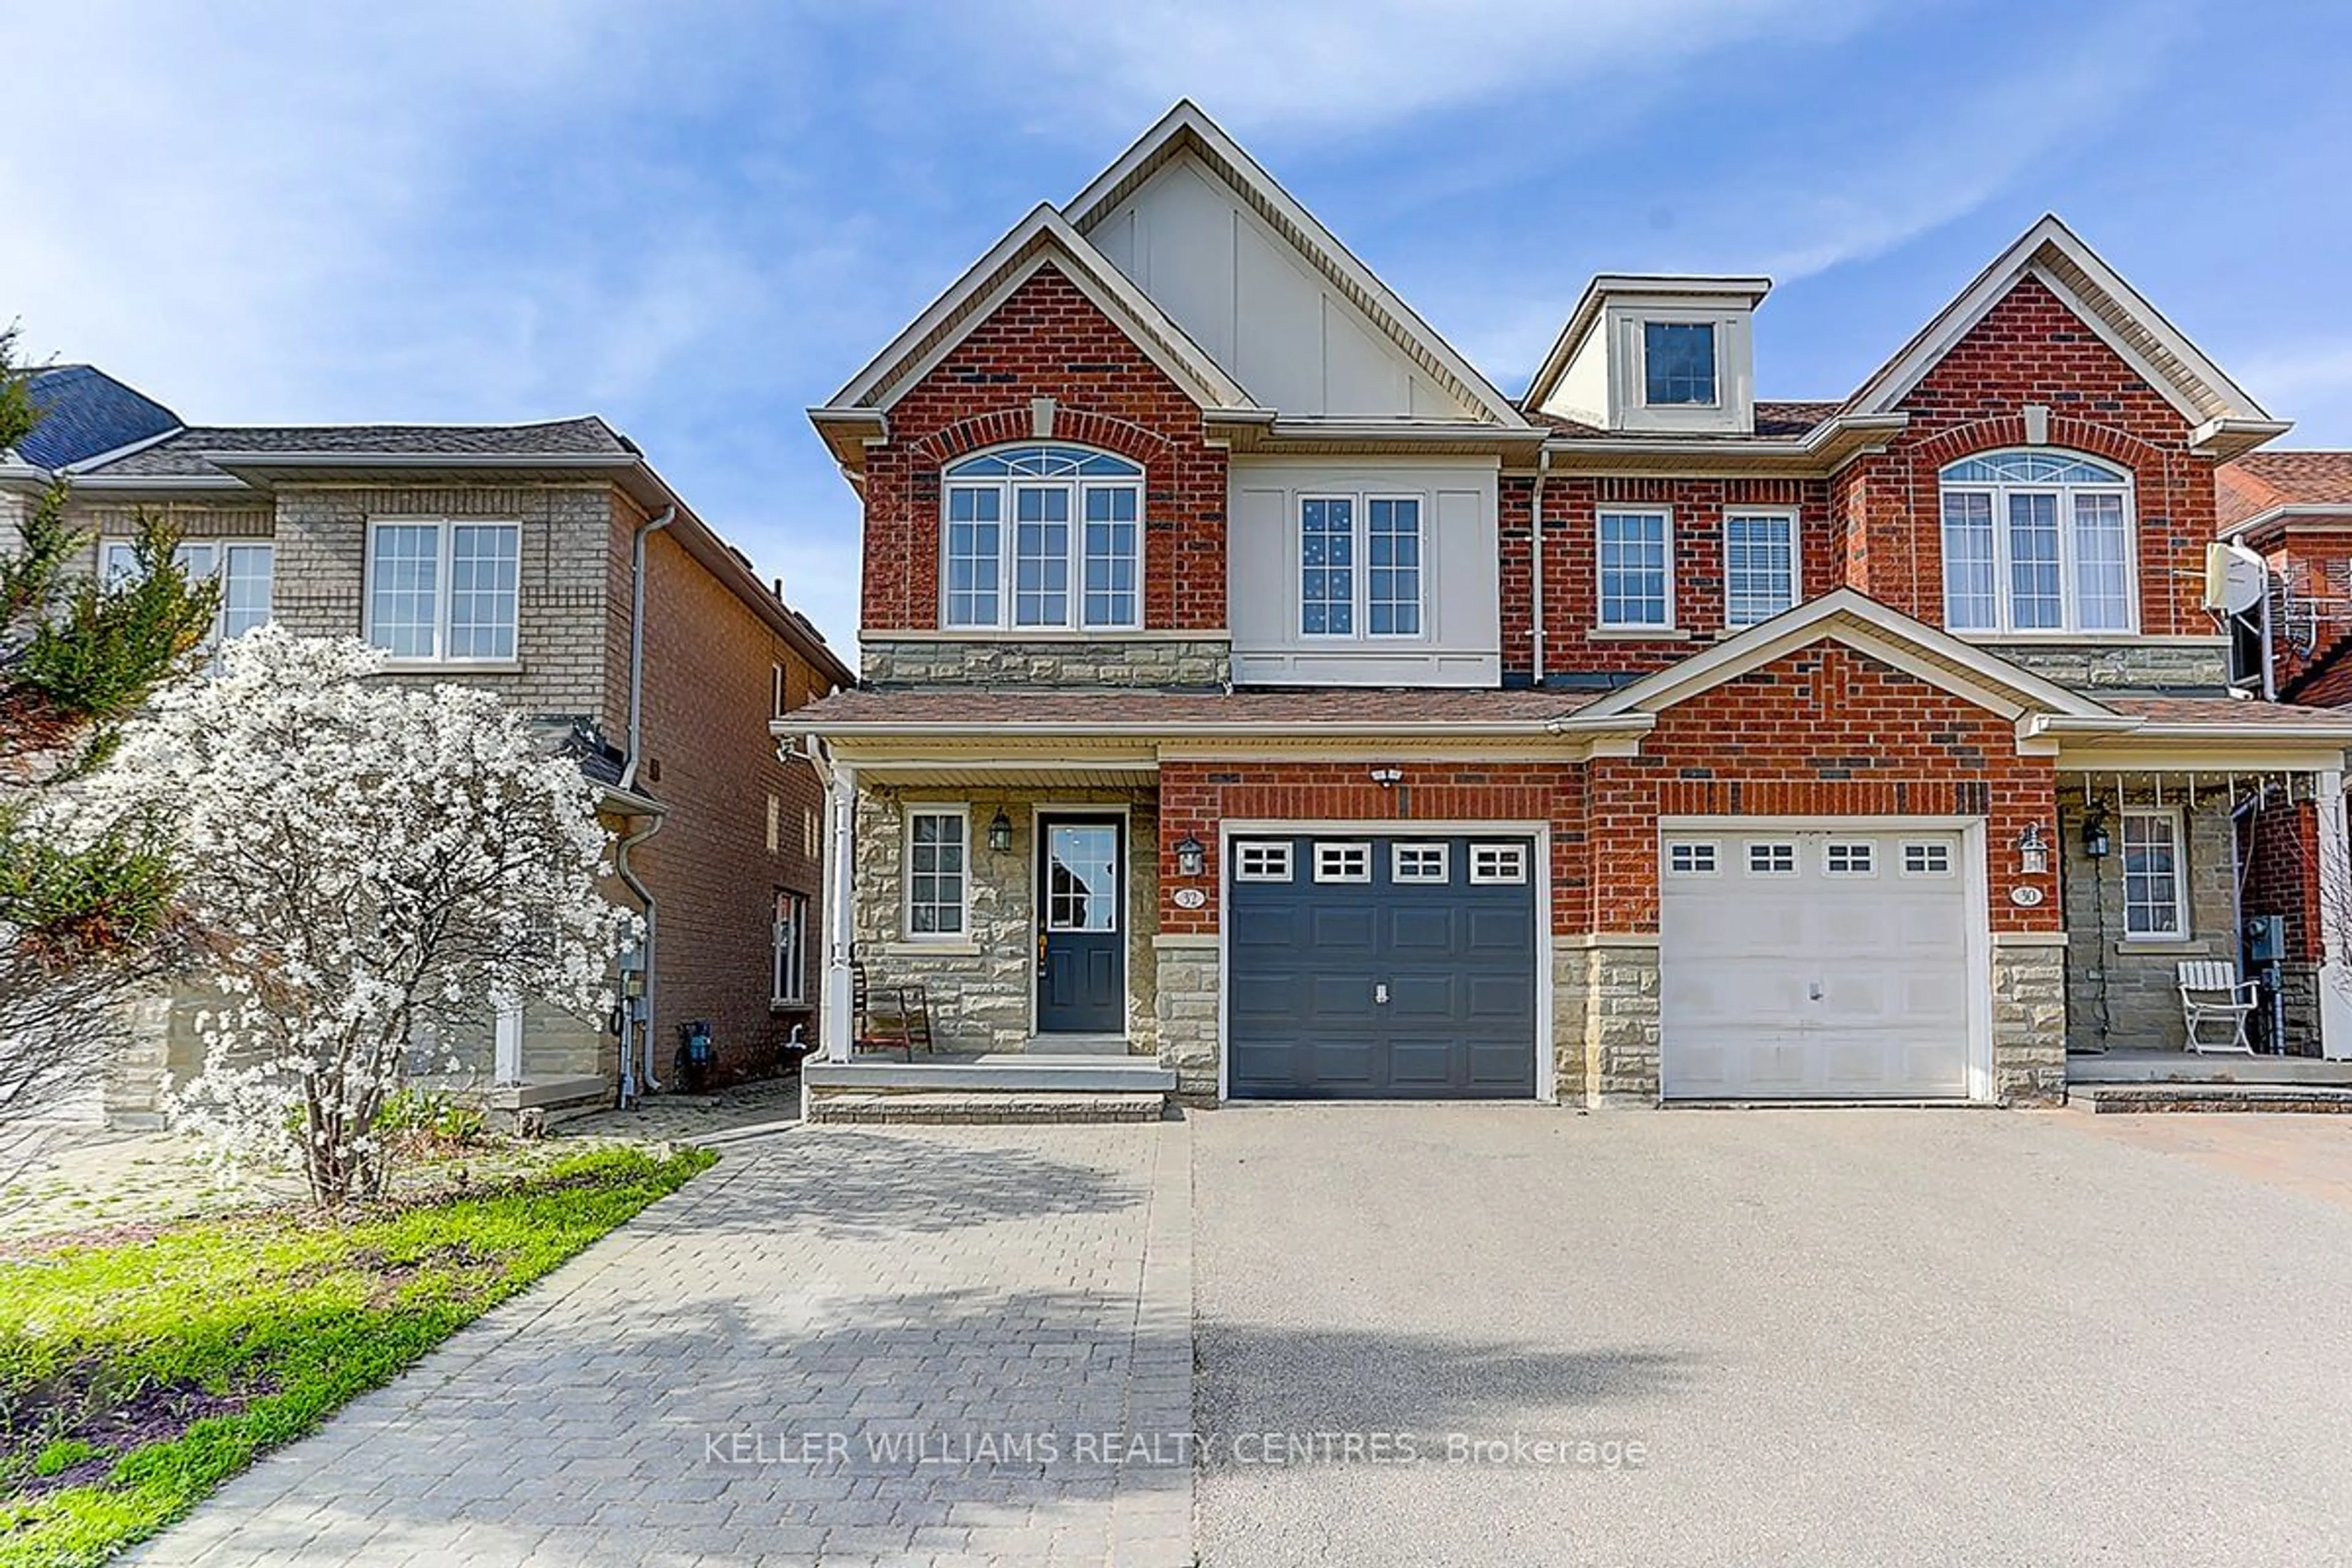 Home with brick exterior material for 32 Idyllwood Ave, Richmond Hill Ontario L4S 2P4